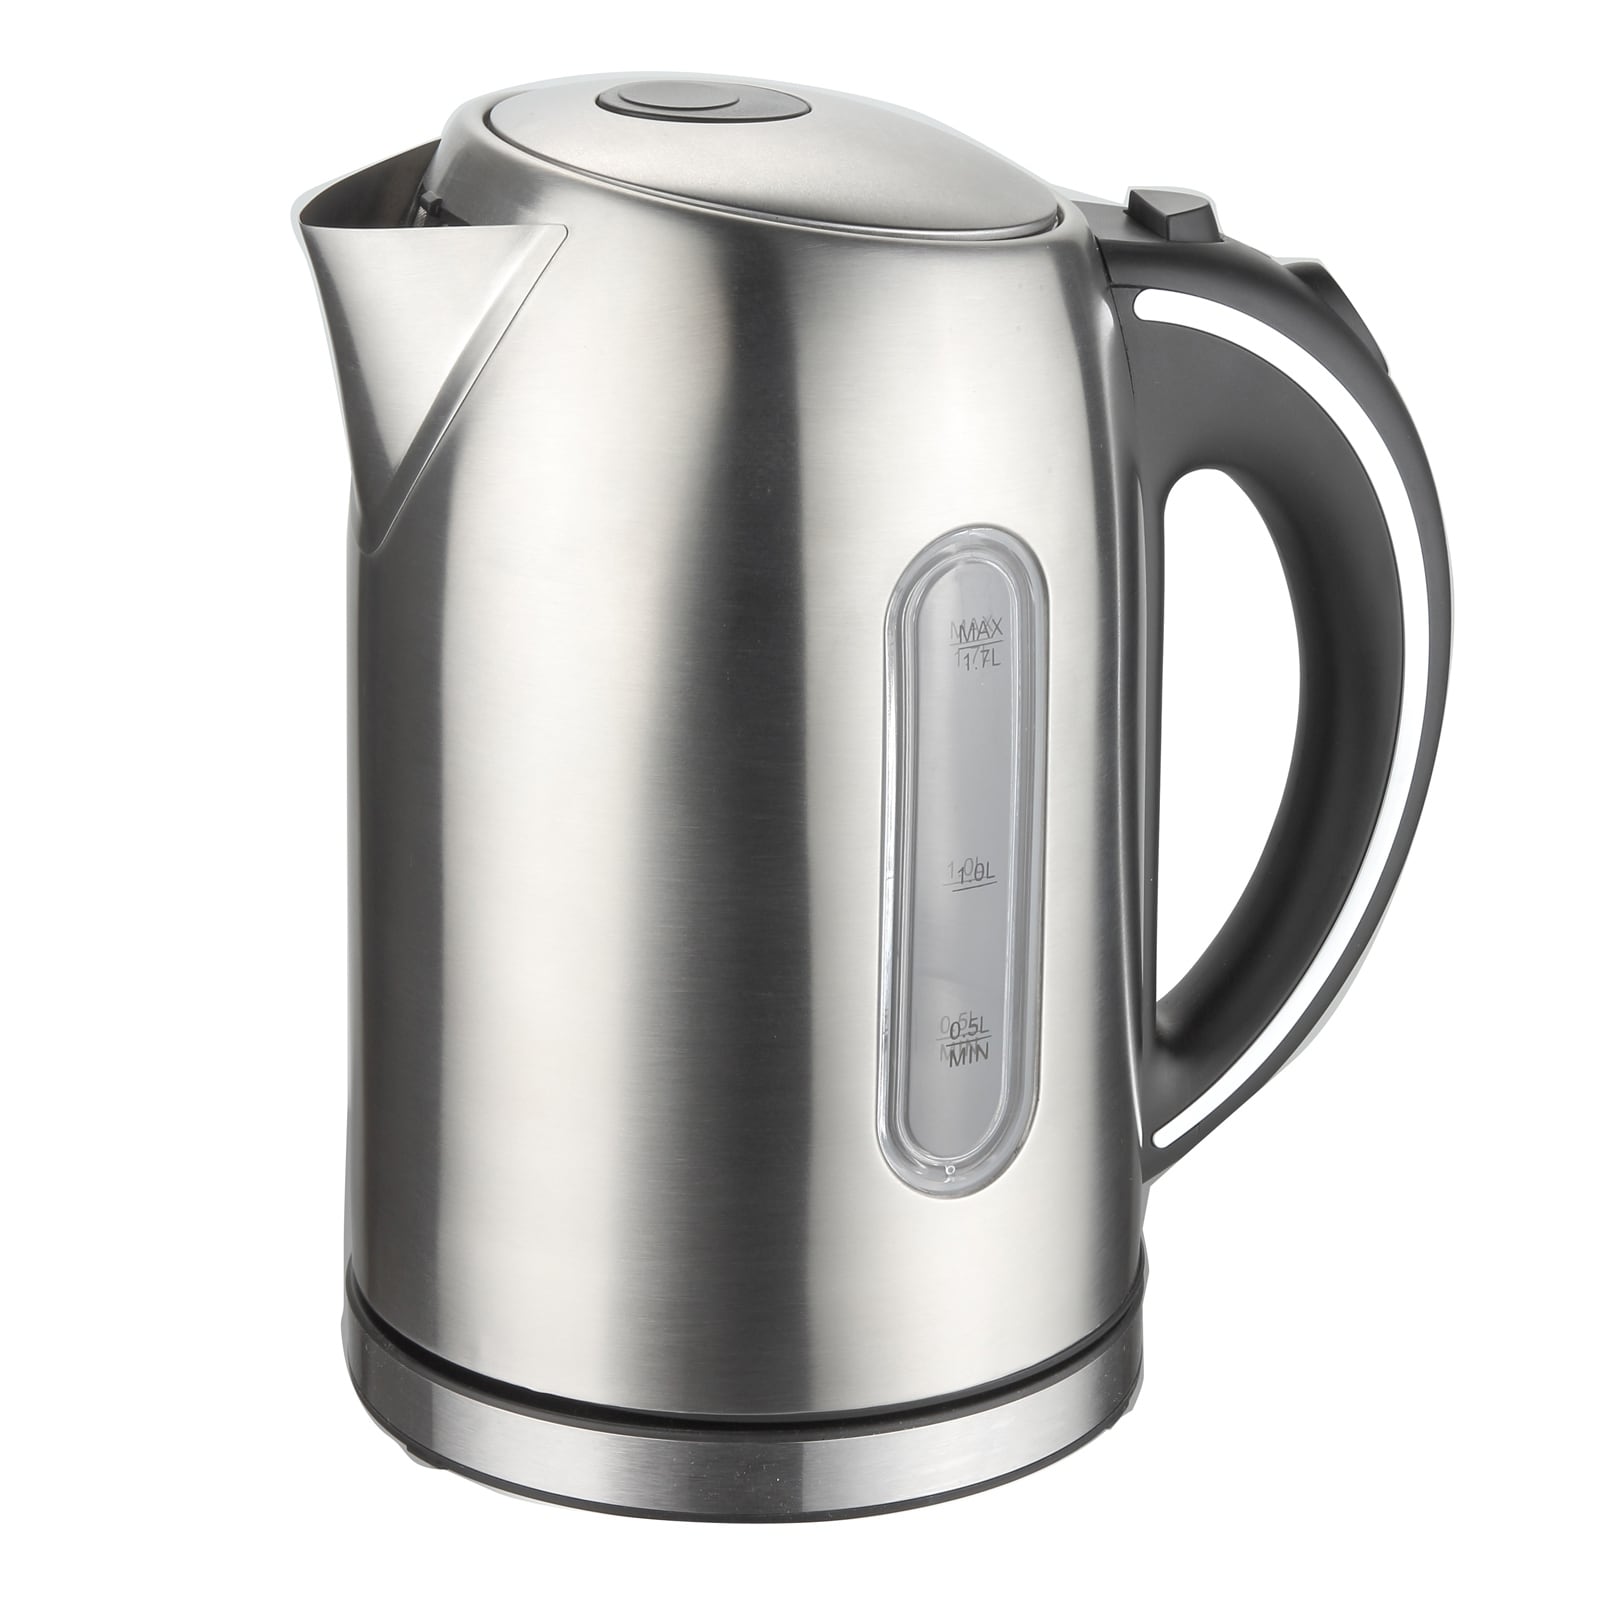 https://ak1.ostkcdn.com/images/products/is/images/direct/21420becce0b747a842c32ec42343d911b7ca5e3/MegaChef-1.7Lt.-Stainless-Steel-Electric-Tea-Kettle.jpg